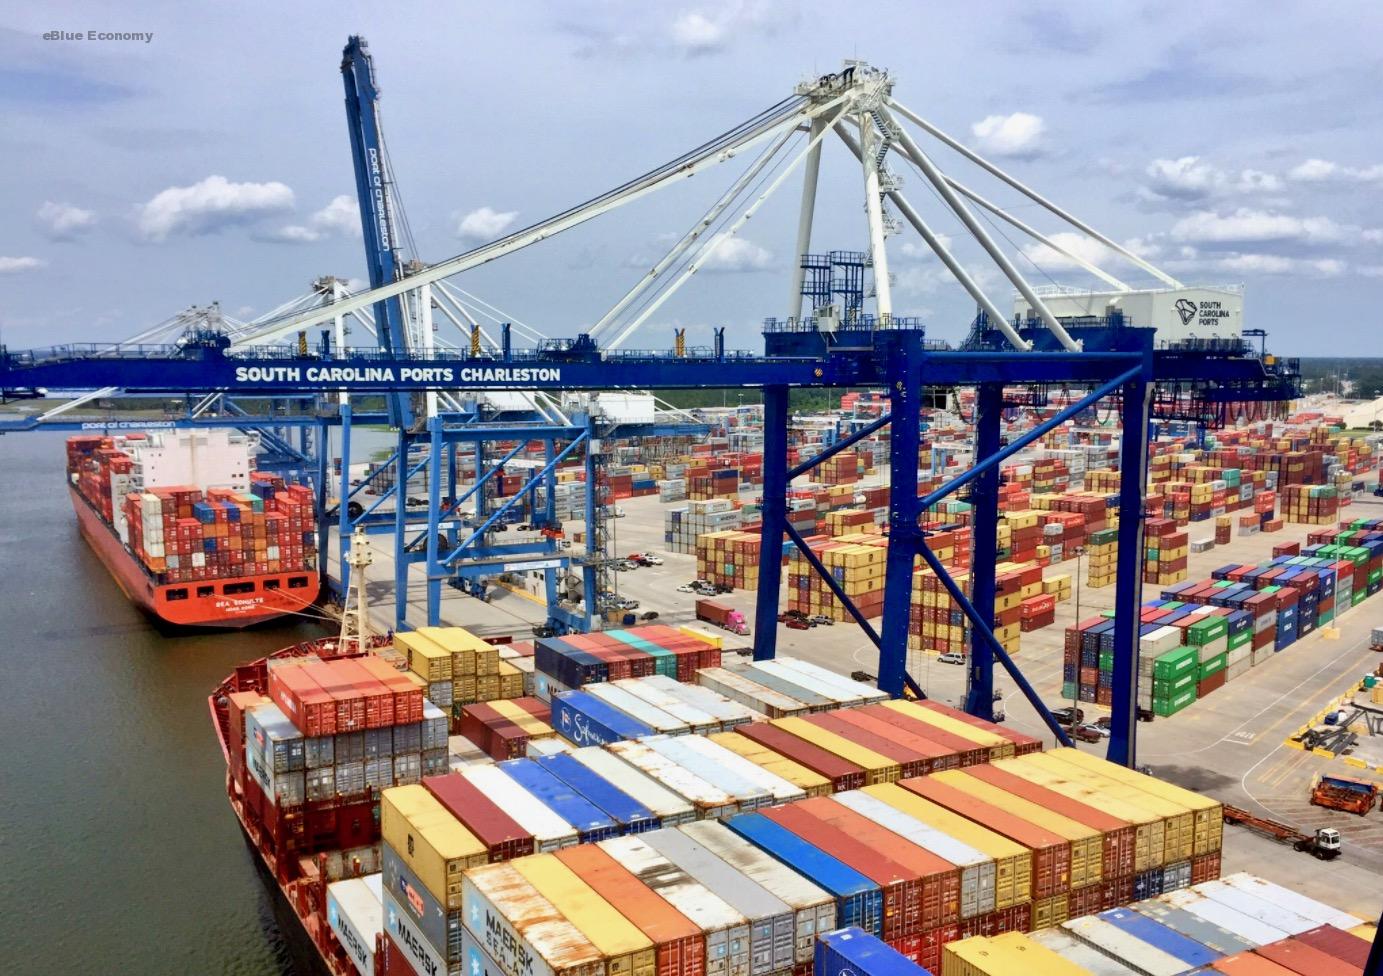 eBlue_economy_SC Ports achieves highest July on record for containers